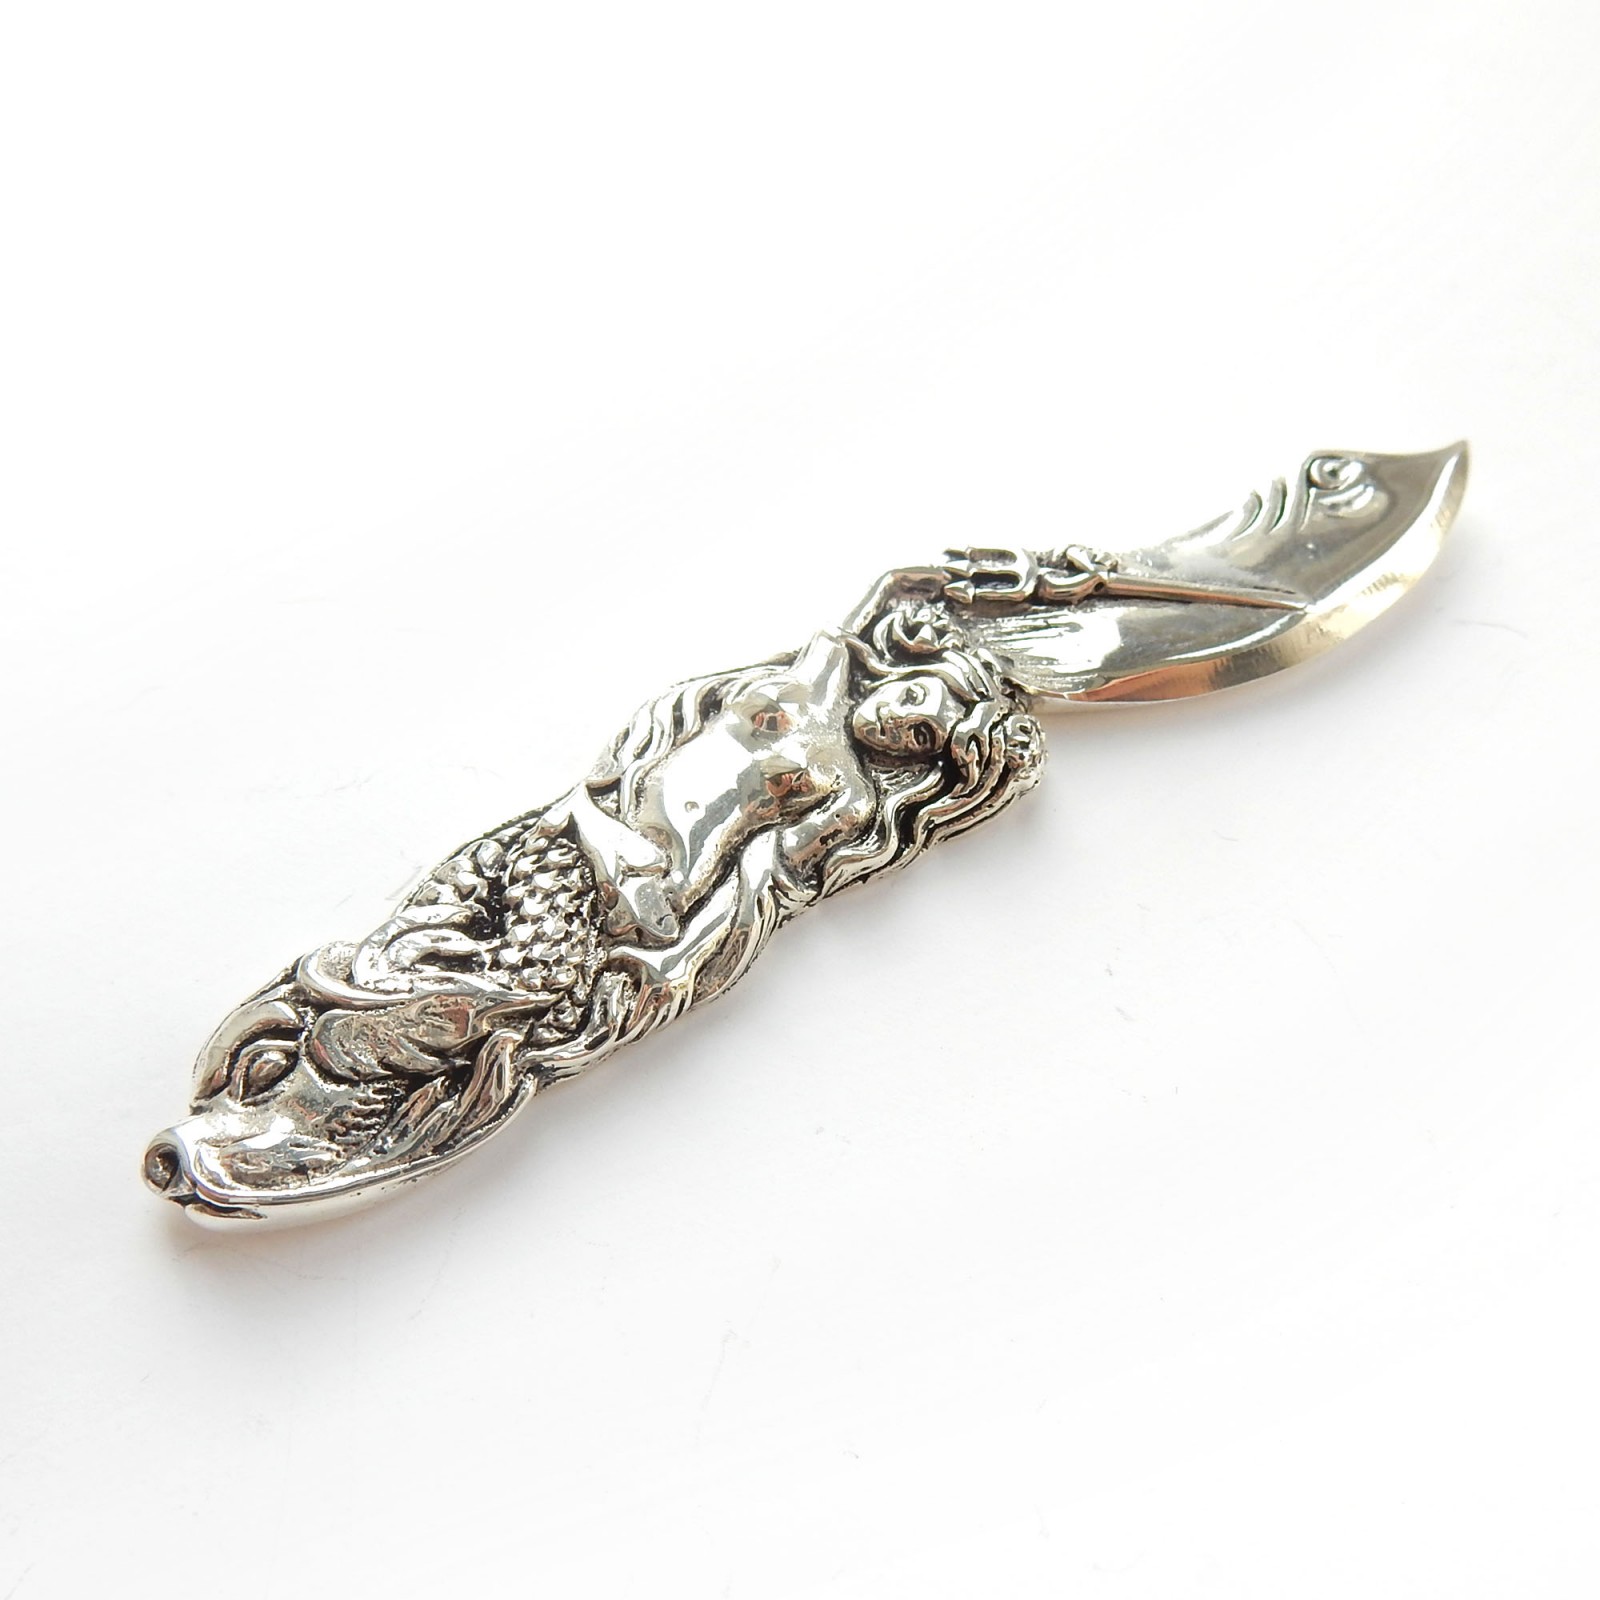 Continental Silver Handled Letter Opener 